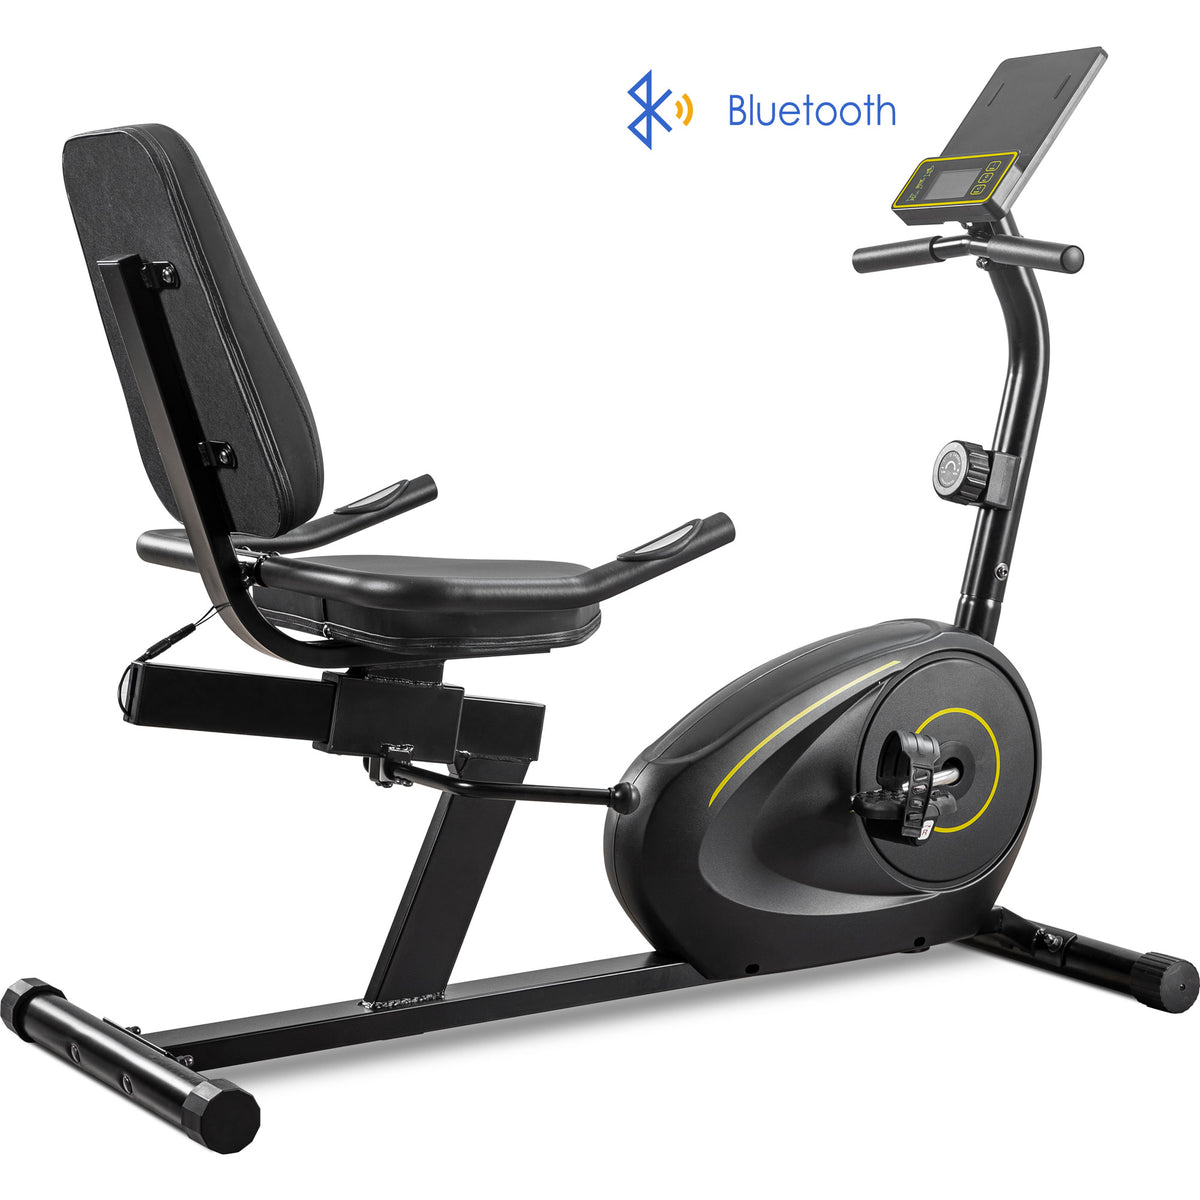 Adjustable Saddle,for Home Workout BTM Indoor Recumbent Exercise Bike with Pulse 8Level Magnetic Resistance Stationary Cycling Bike with Bluetooth